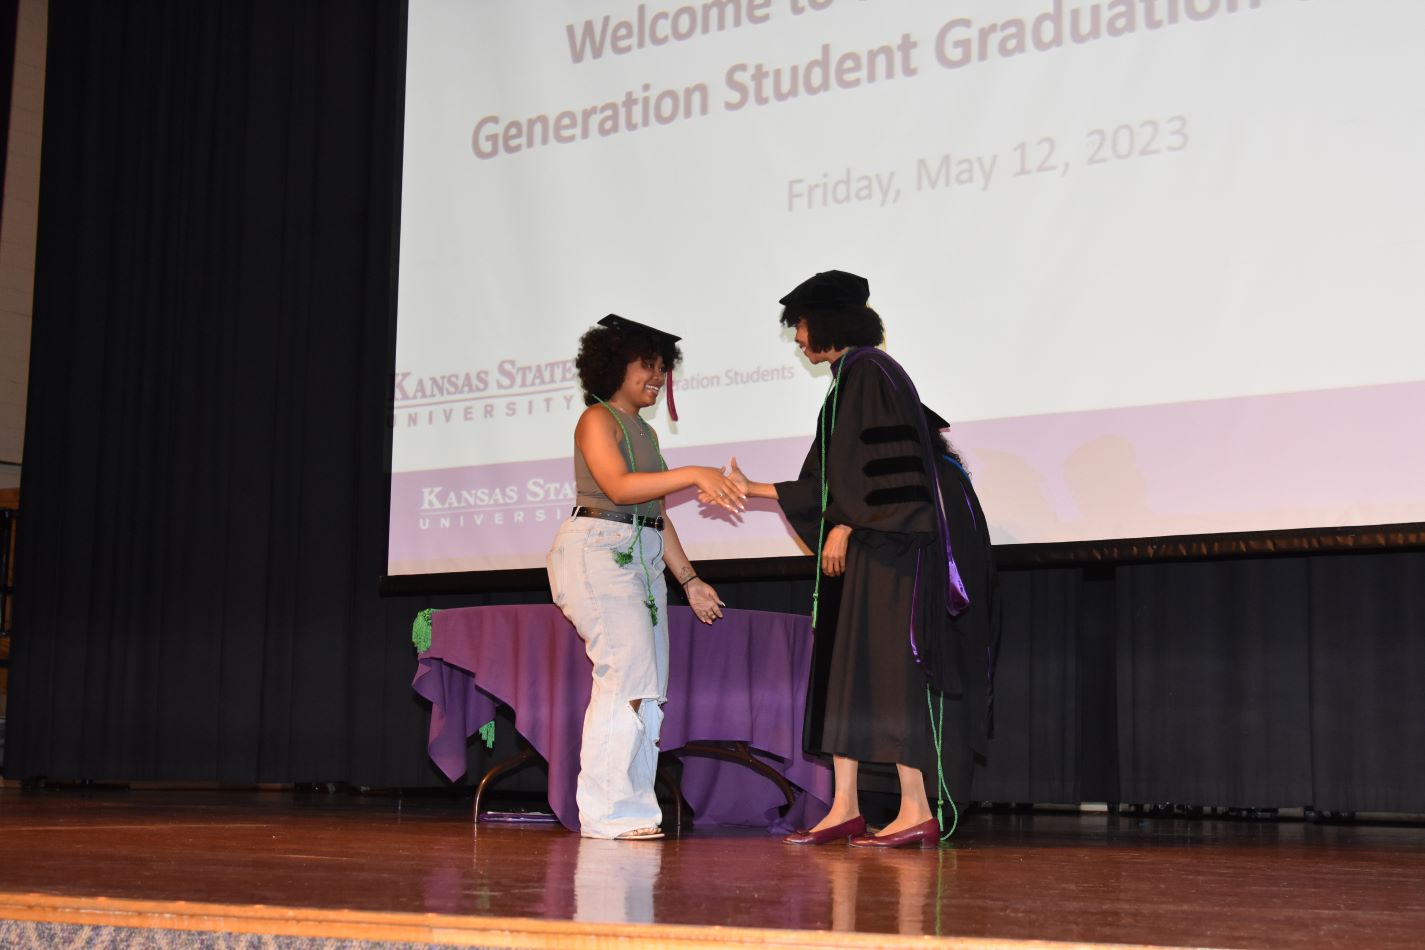 Dr. Rana Johnson is shaking a student's hand on stage during the 2023 graduation celebration.